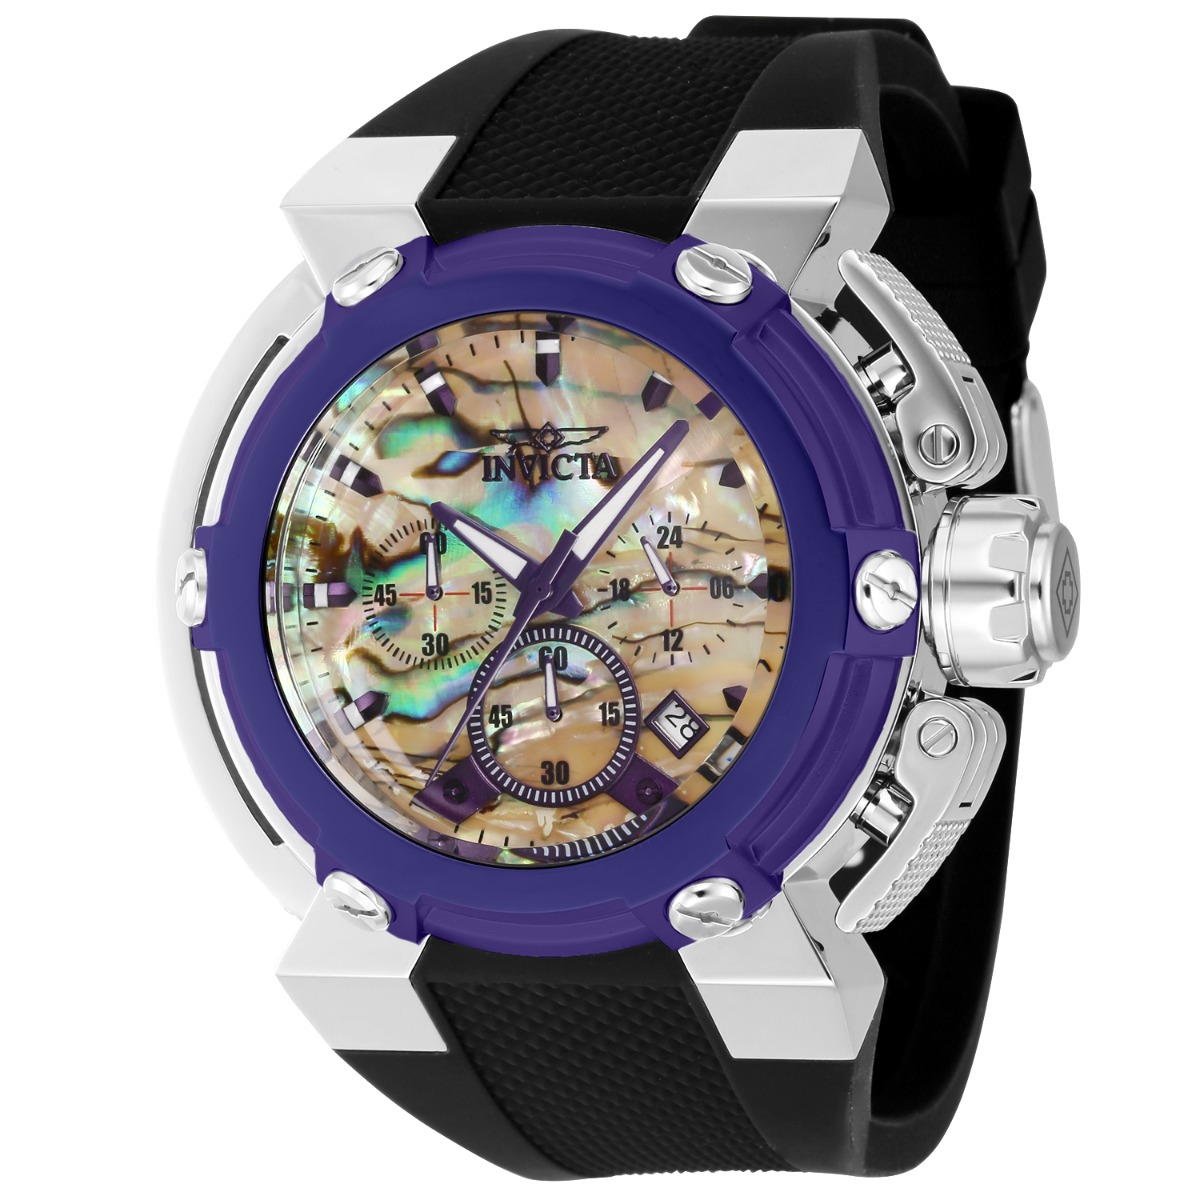 Invicta Coalition Forces Men's Watches (Mod: 40063) | Invicta Watches